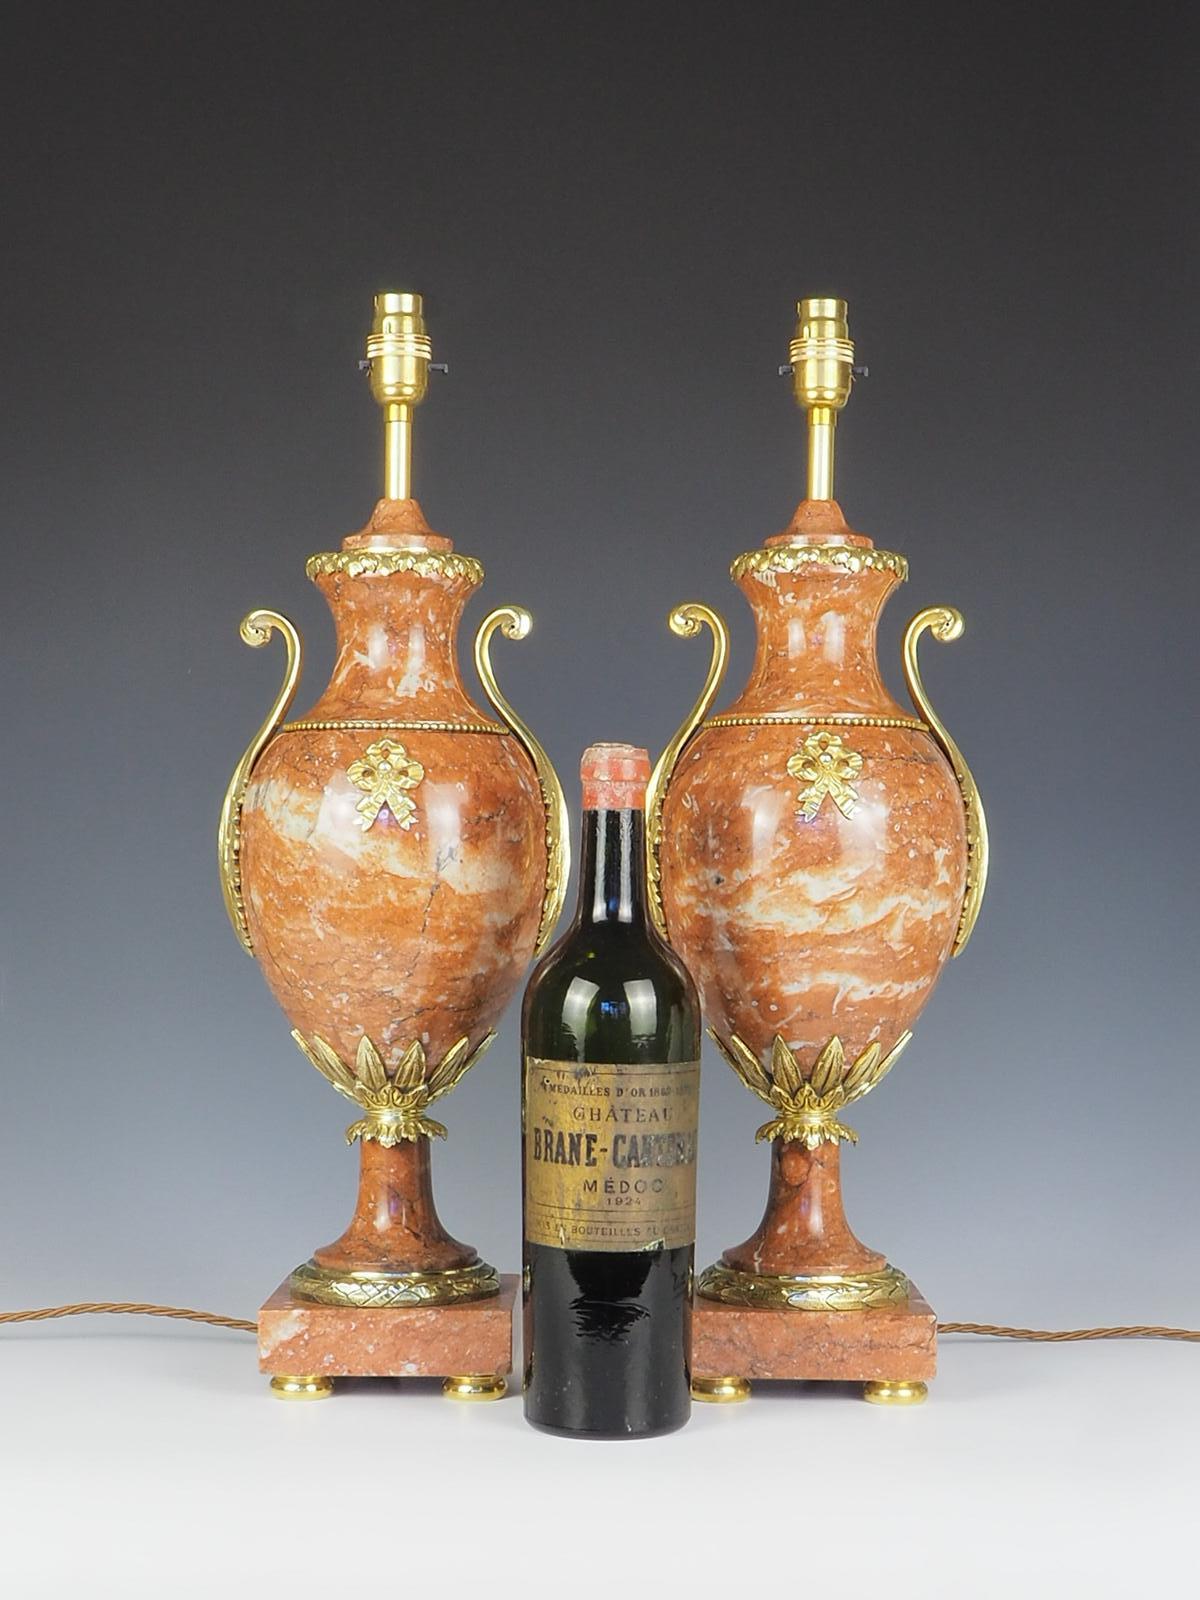 Exquisite pair of French Cassolette Rouge Marble Table Lamps exudes elegance and sophistication.

The intricate carvings on the rouge marble showcase the craftsmanship and attention to detail that was prevalent during the 19th century in